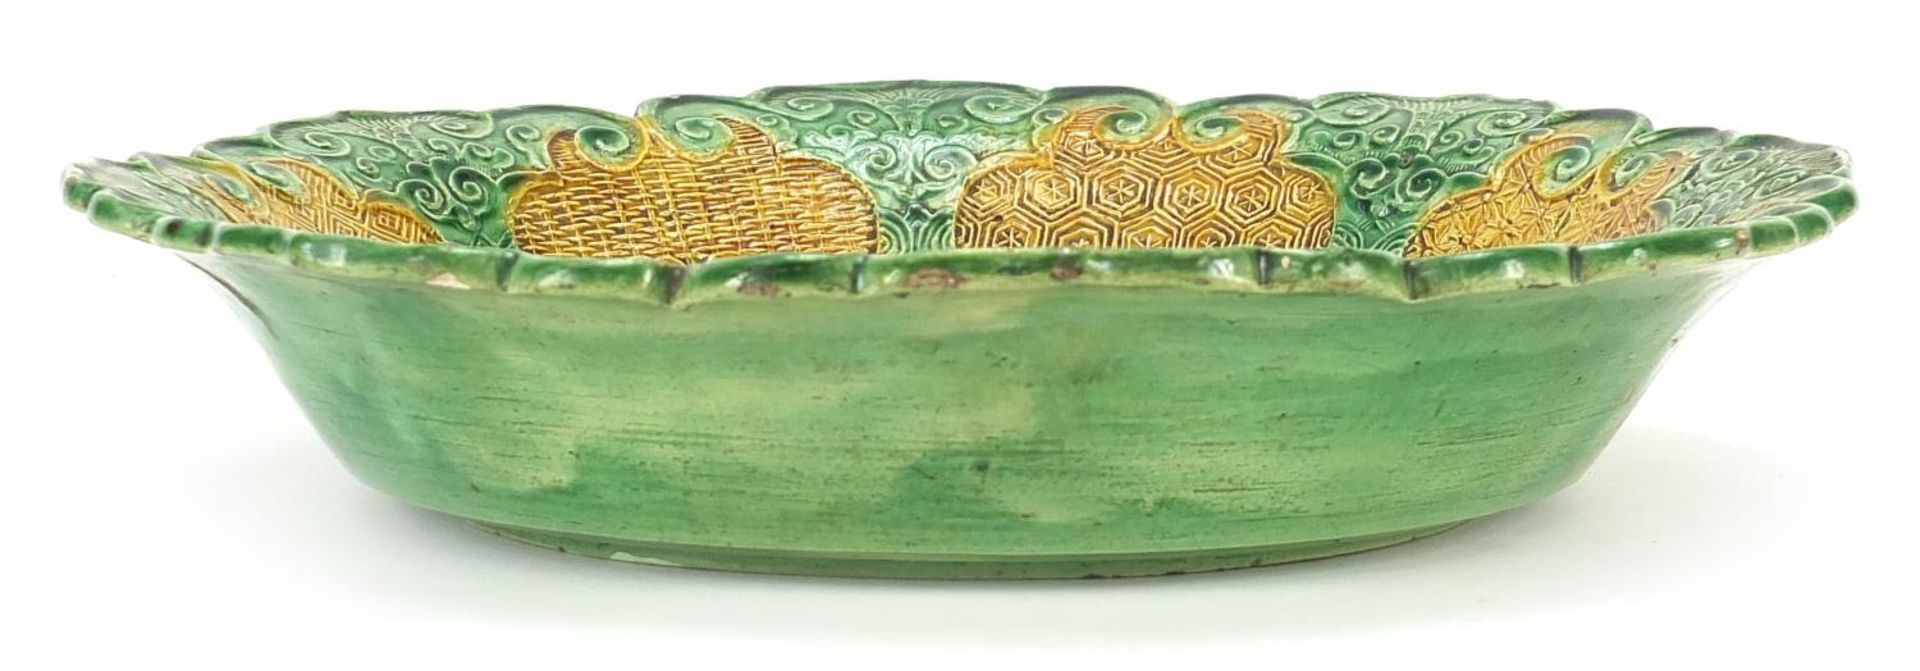 Chinese green and yellow glazed porcelain dish decorated in relief with figures in a palace setting, - Image 3 of 5